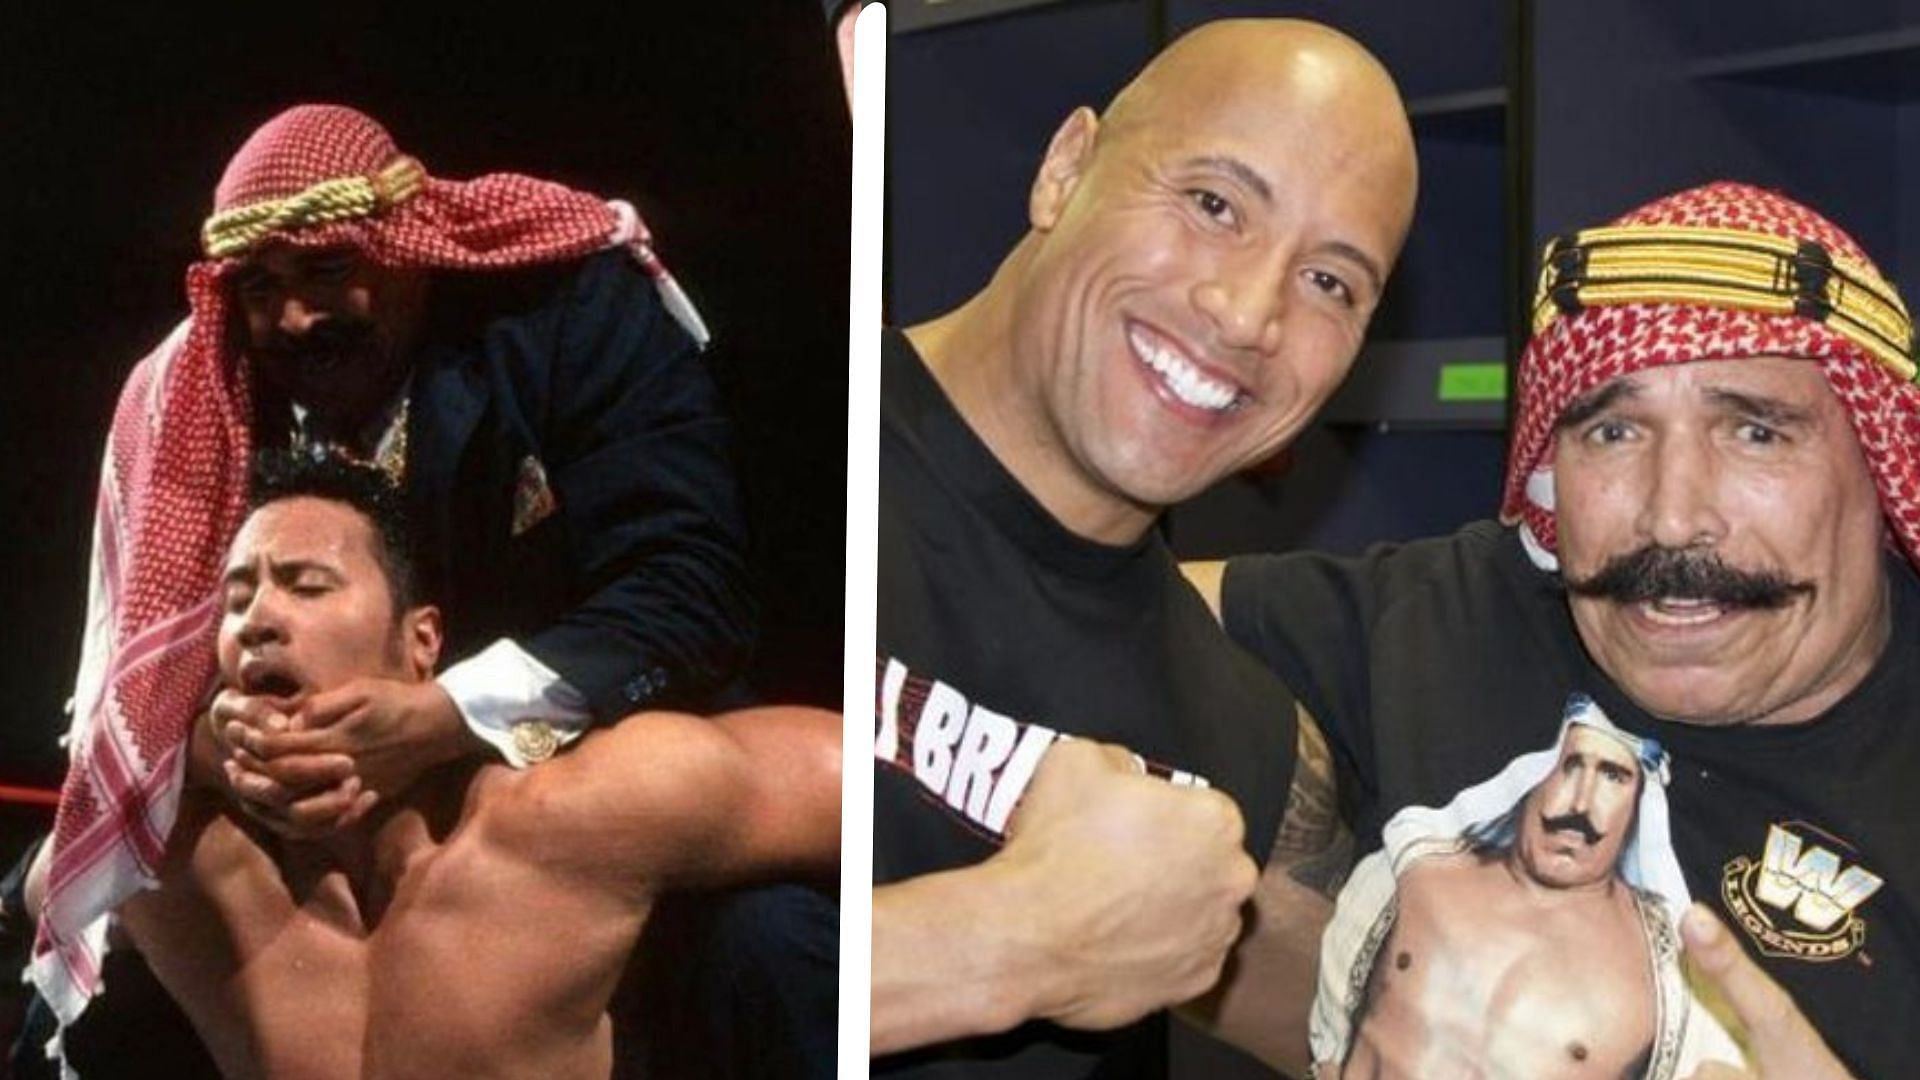 The Iron Sheik and The Rock share a long history together